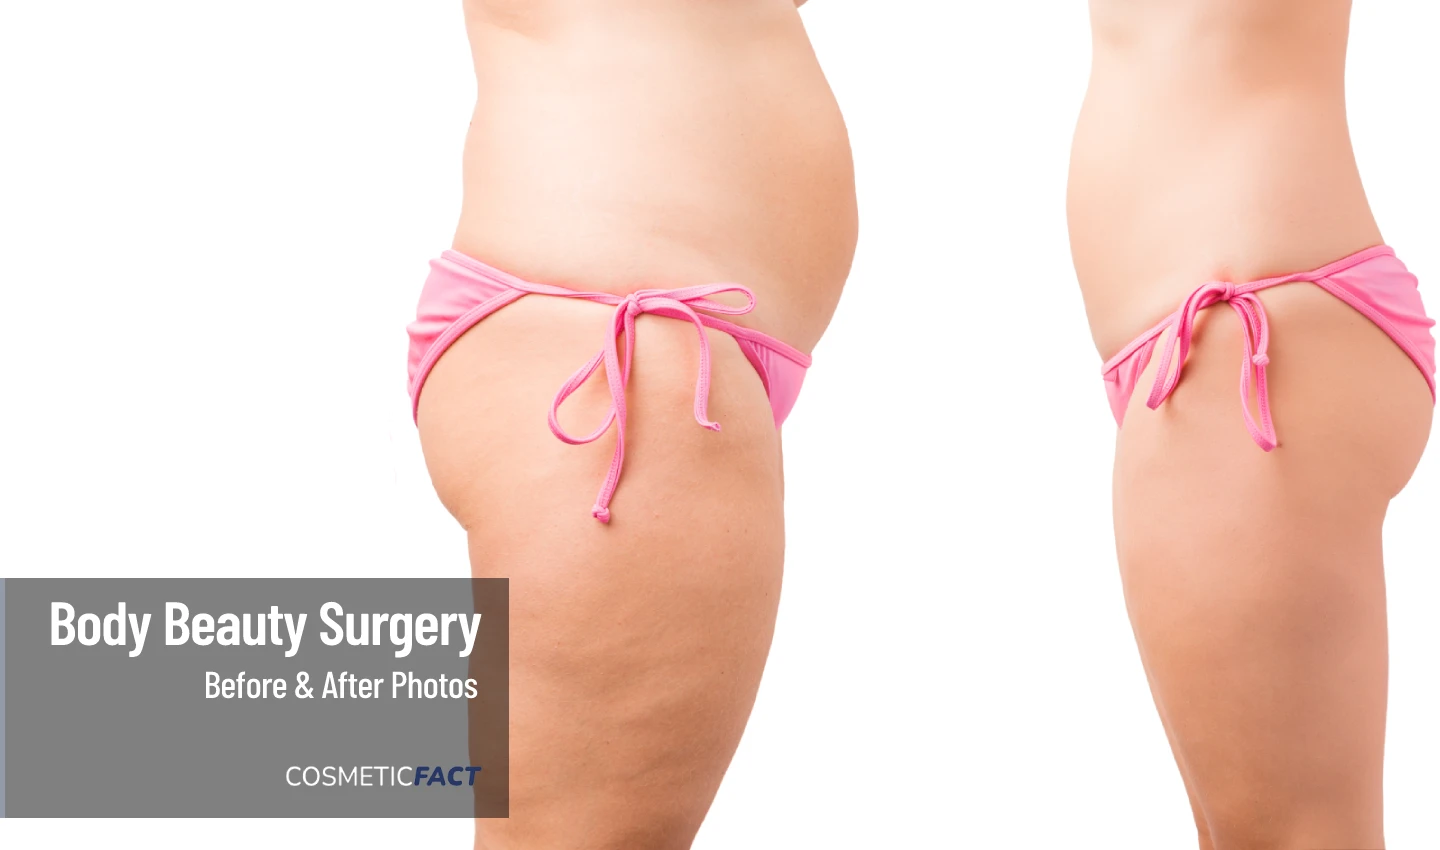 Before and After Photos of Liposuction Surgery on a Mature Woman - witness the stunning transformation with these Liposuction Surgery Photos showcasing the effects of removing excess fat to create a more sculpted and toned physique.